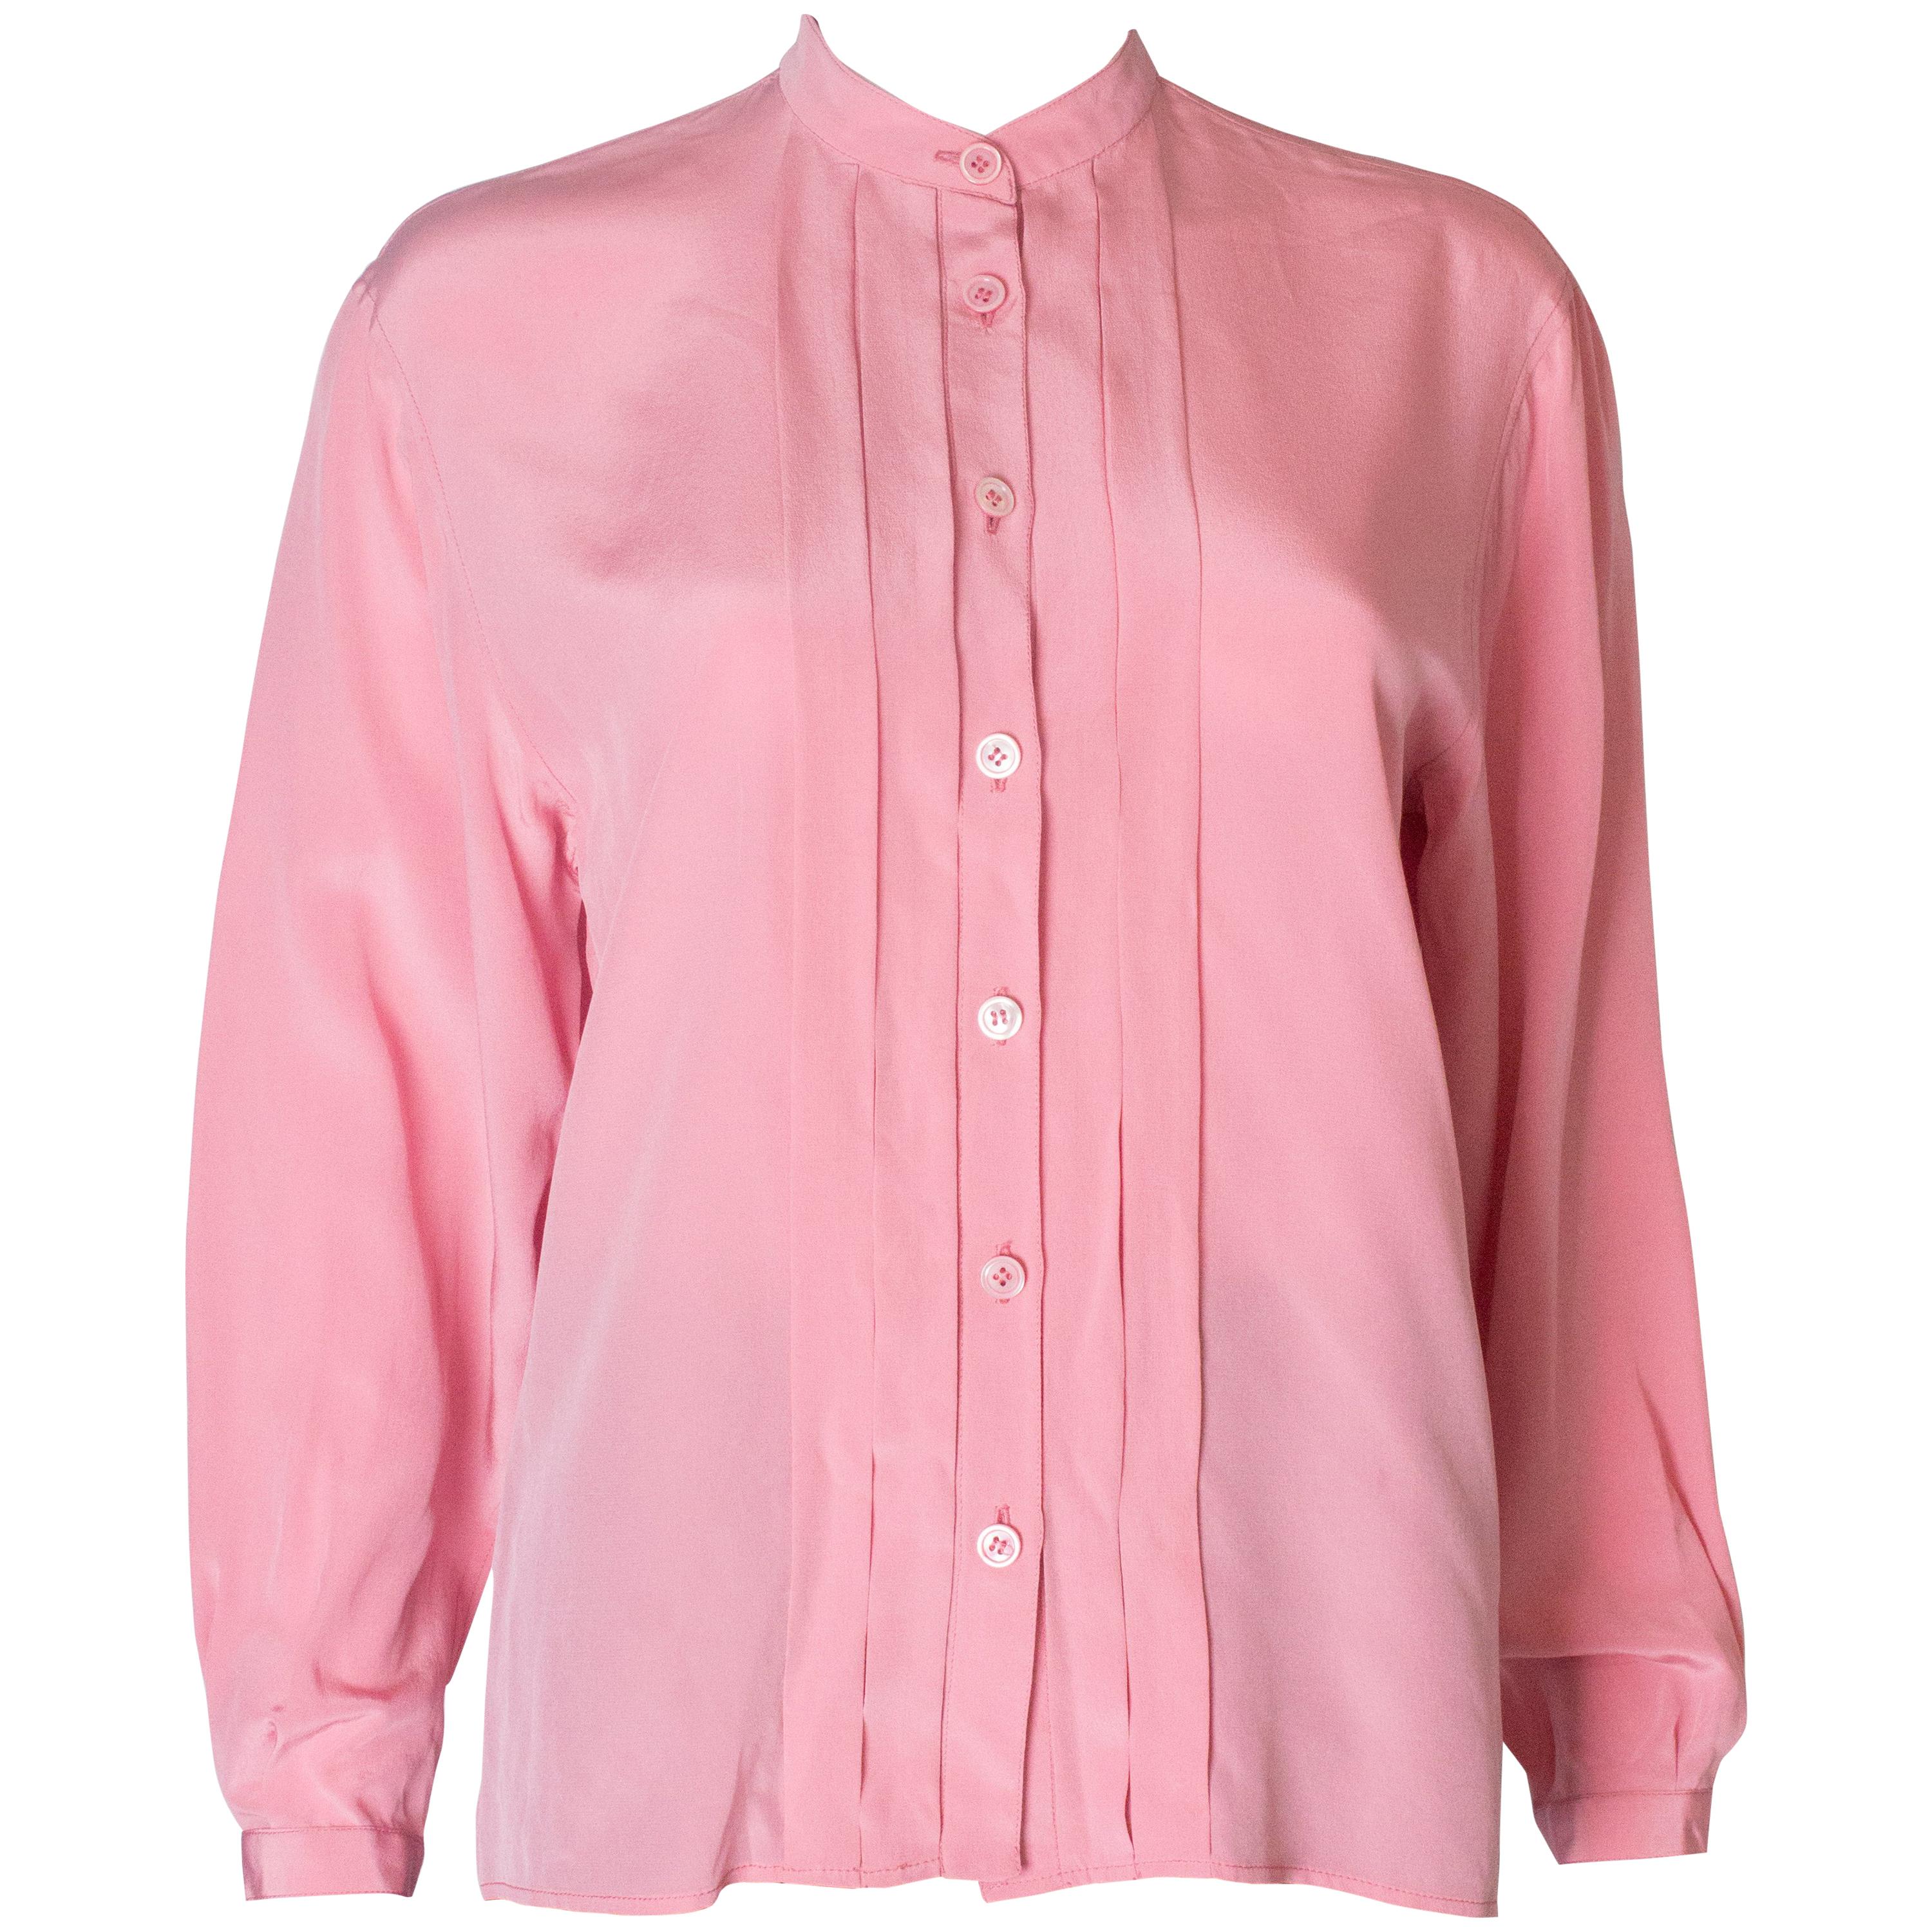 A Vintage 1990s pale pink silk button up blouse by Yves Saint Laurent ...